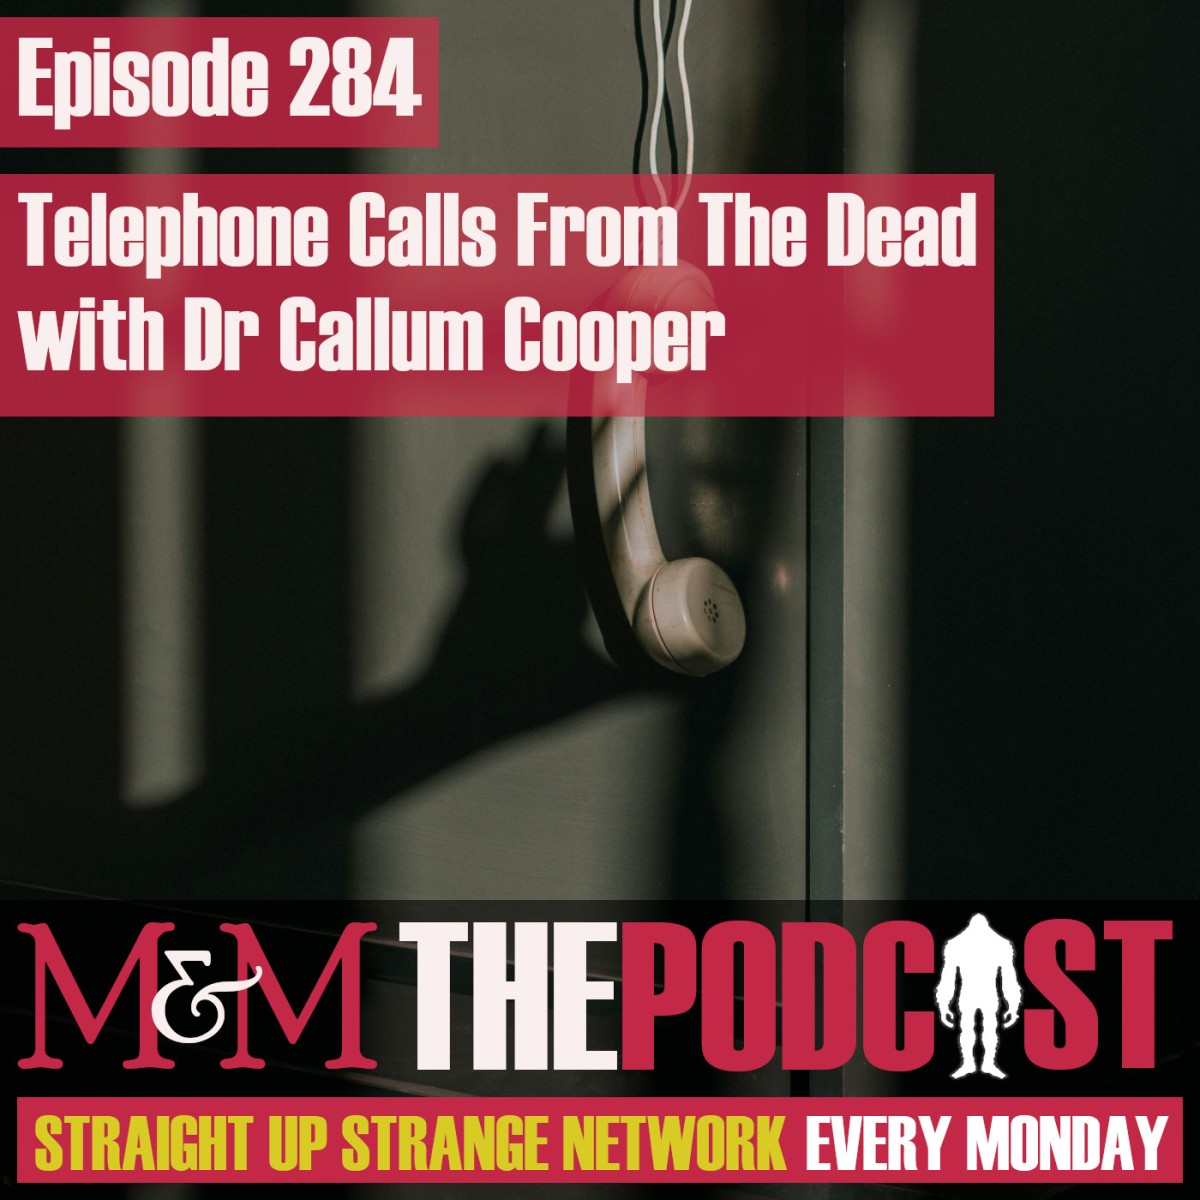 Episode 284: Telephone Calls From The Dead with Dr Cal Cooper